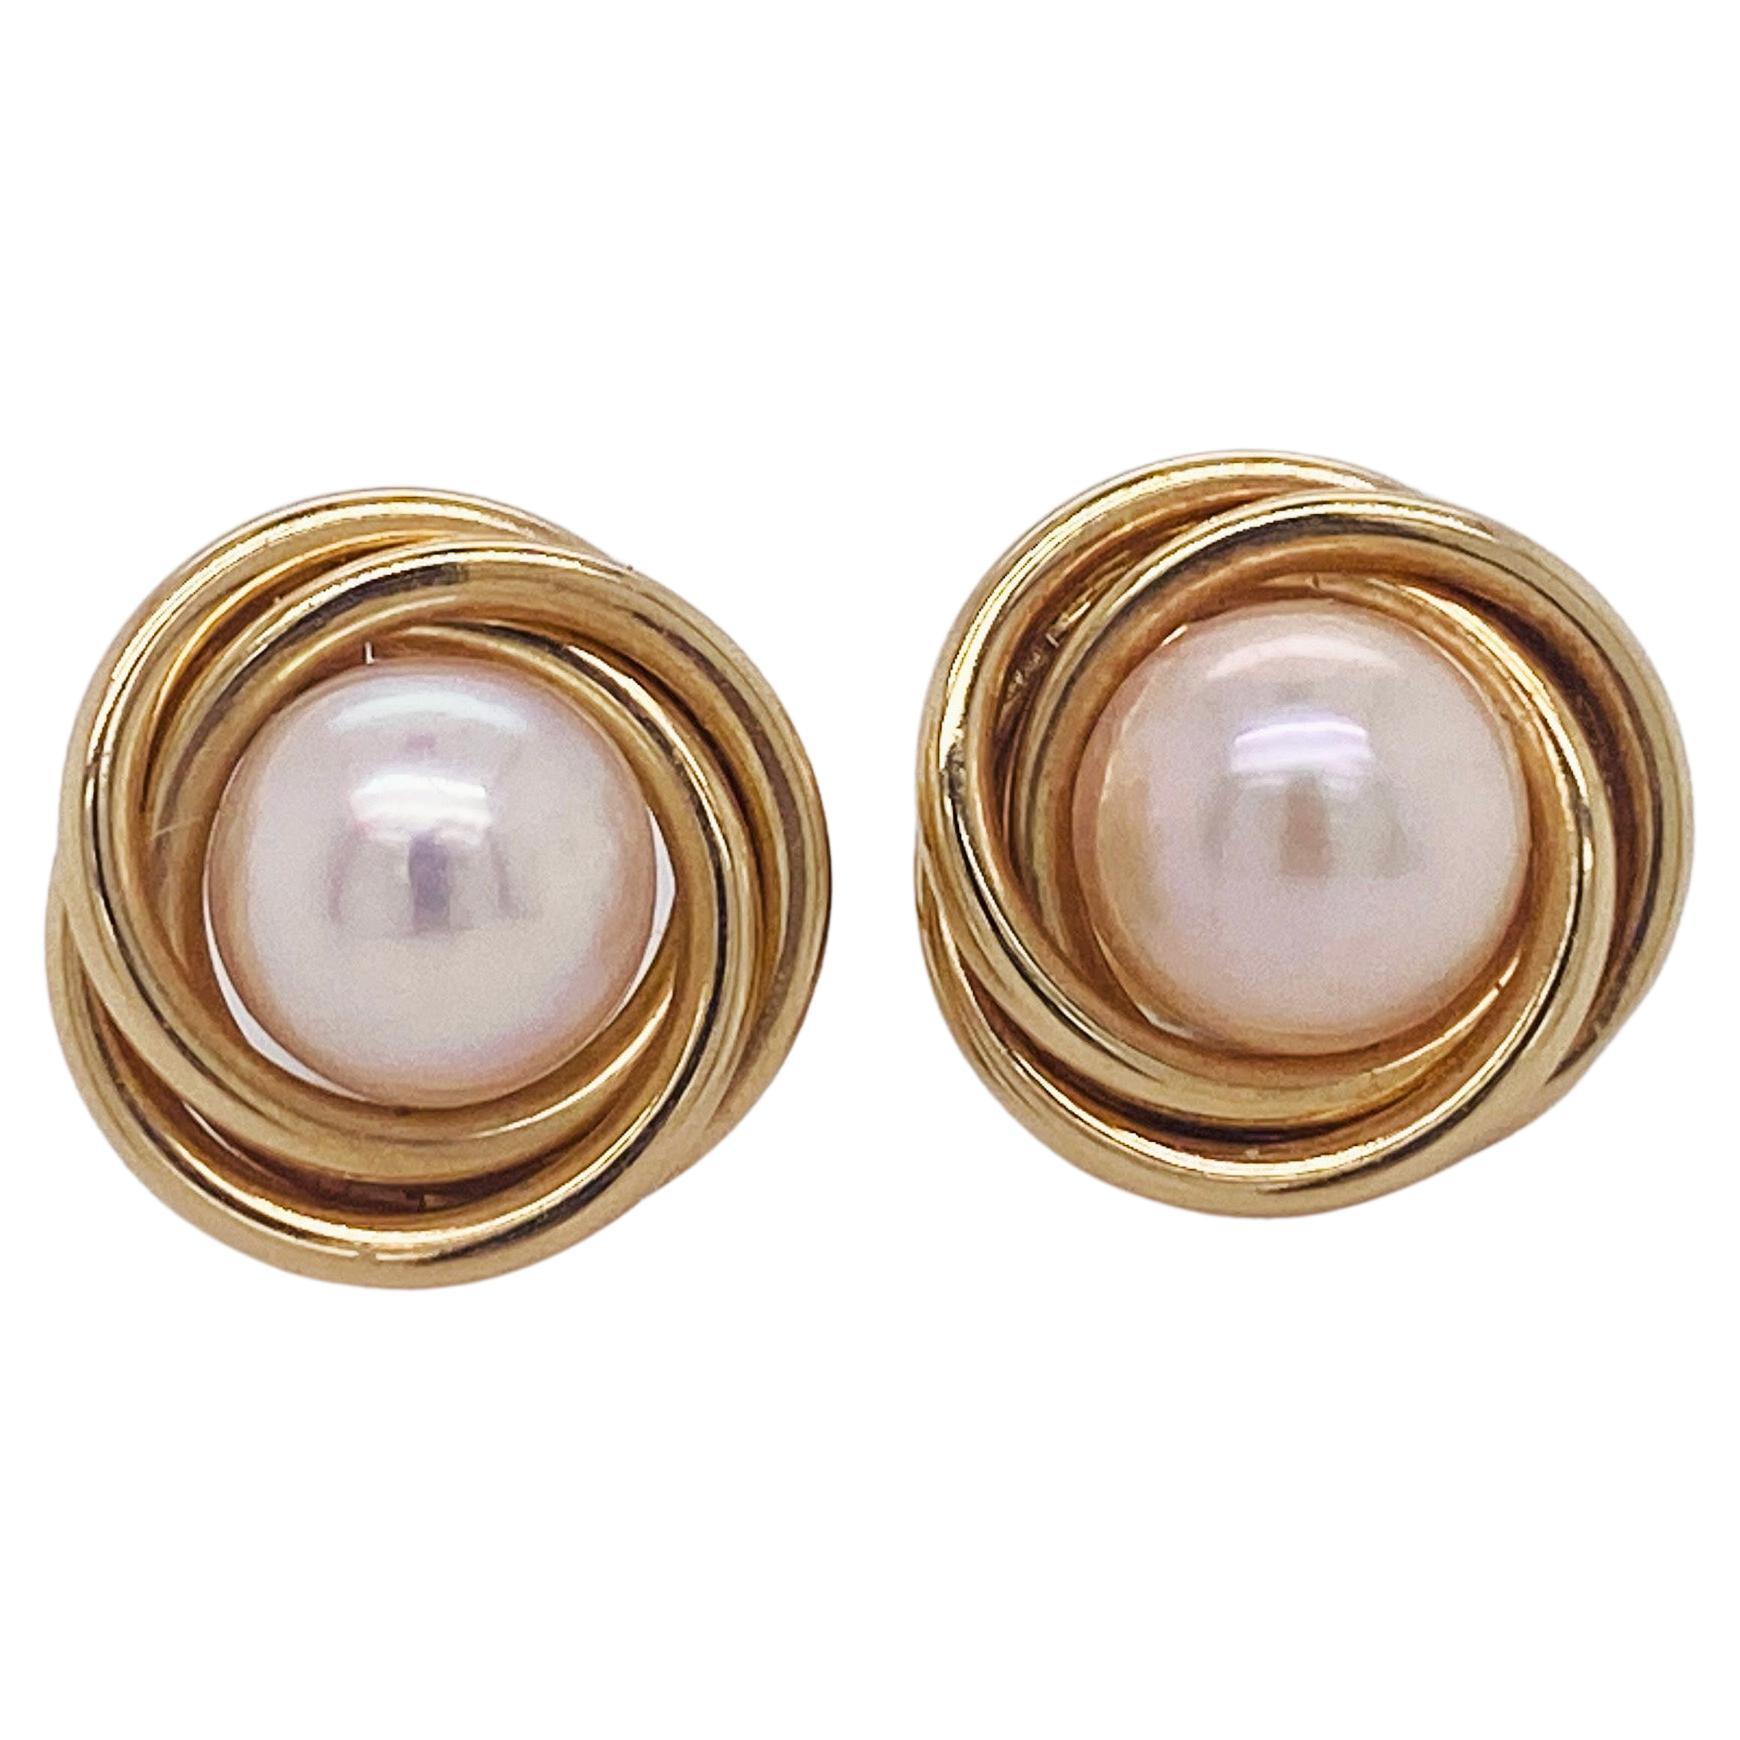 Freshwater Pearls in Love Knot Stud in 14k Yellow Gold Post Earrings Posts Knot For Sale